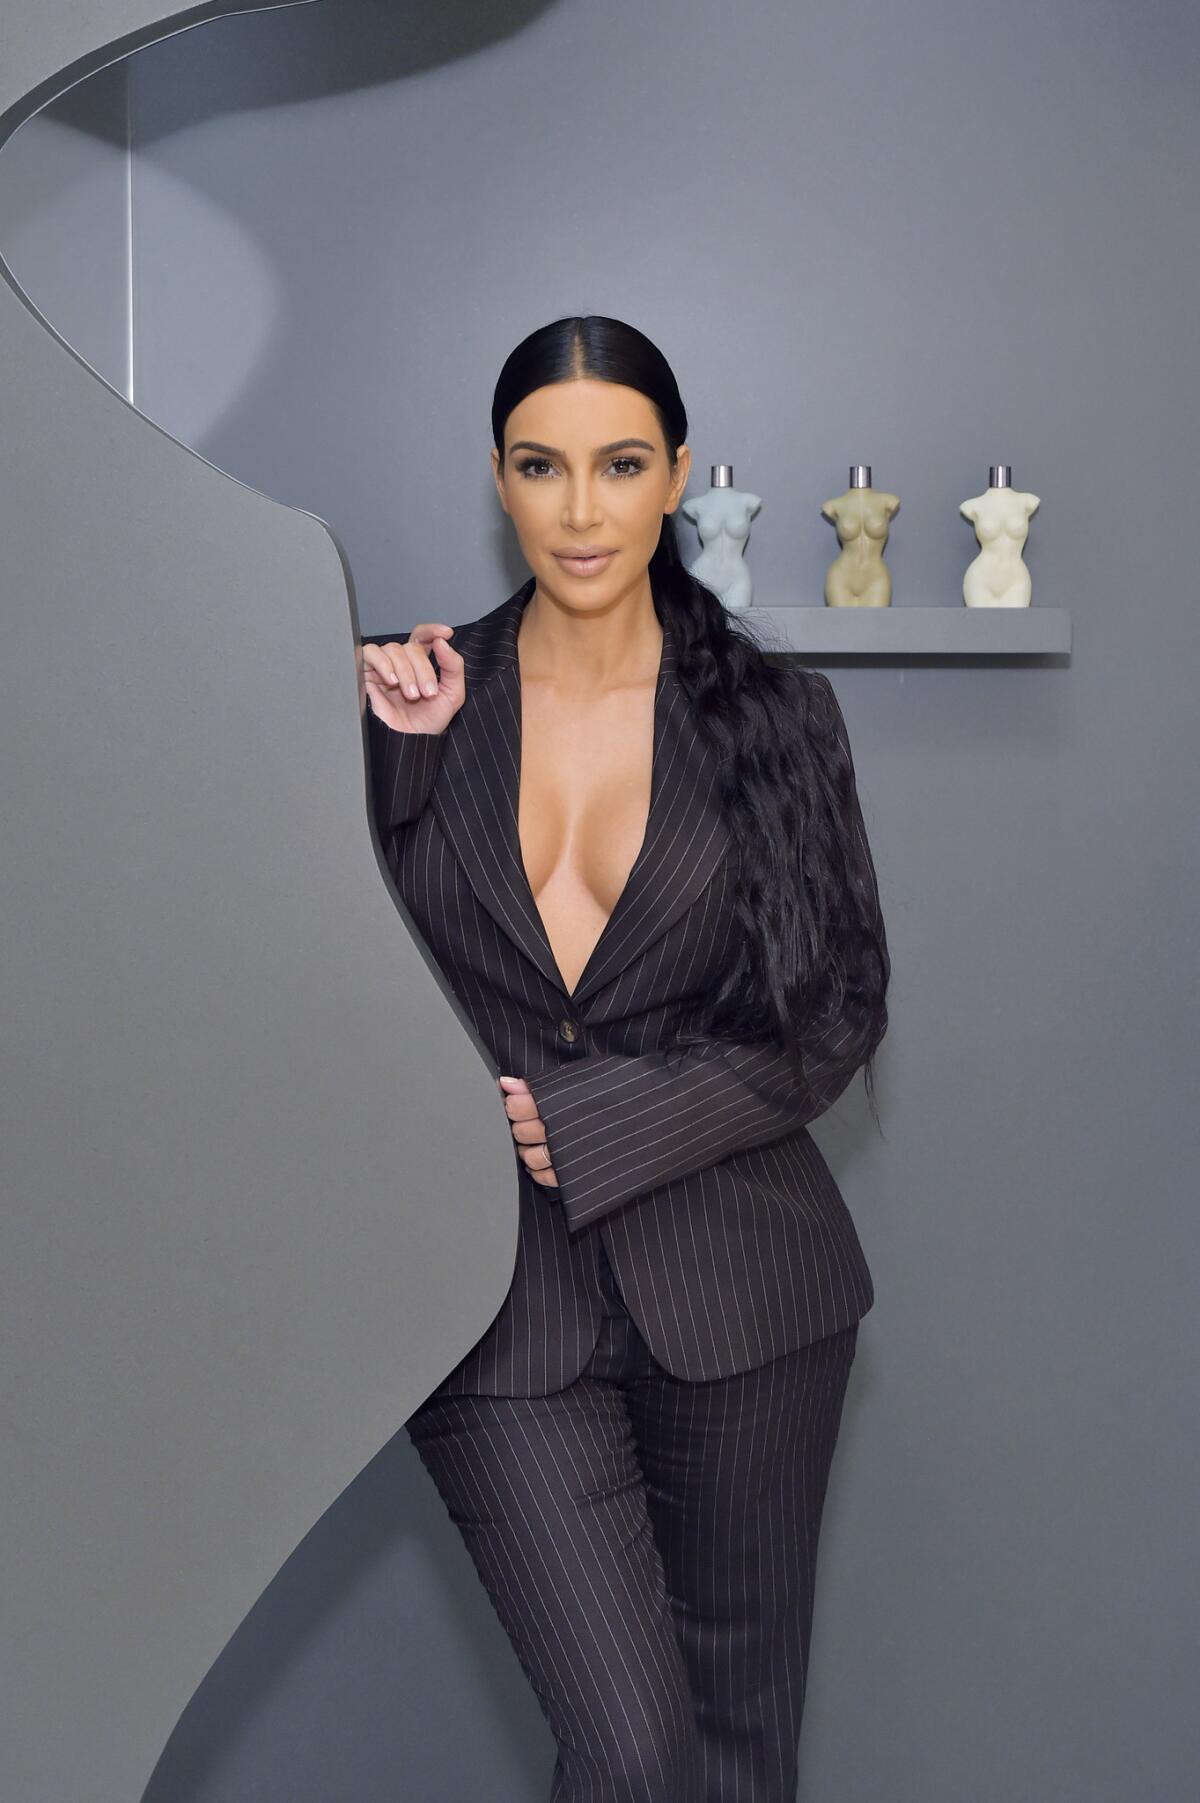 Kardashian West at the KKW Beauty and Fragrance pop-up store at South Coast Plaza in Costa Mesa.